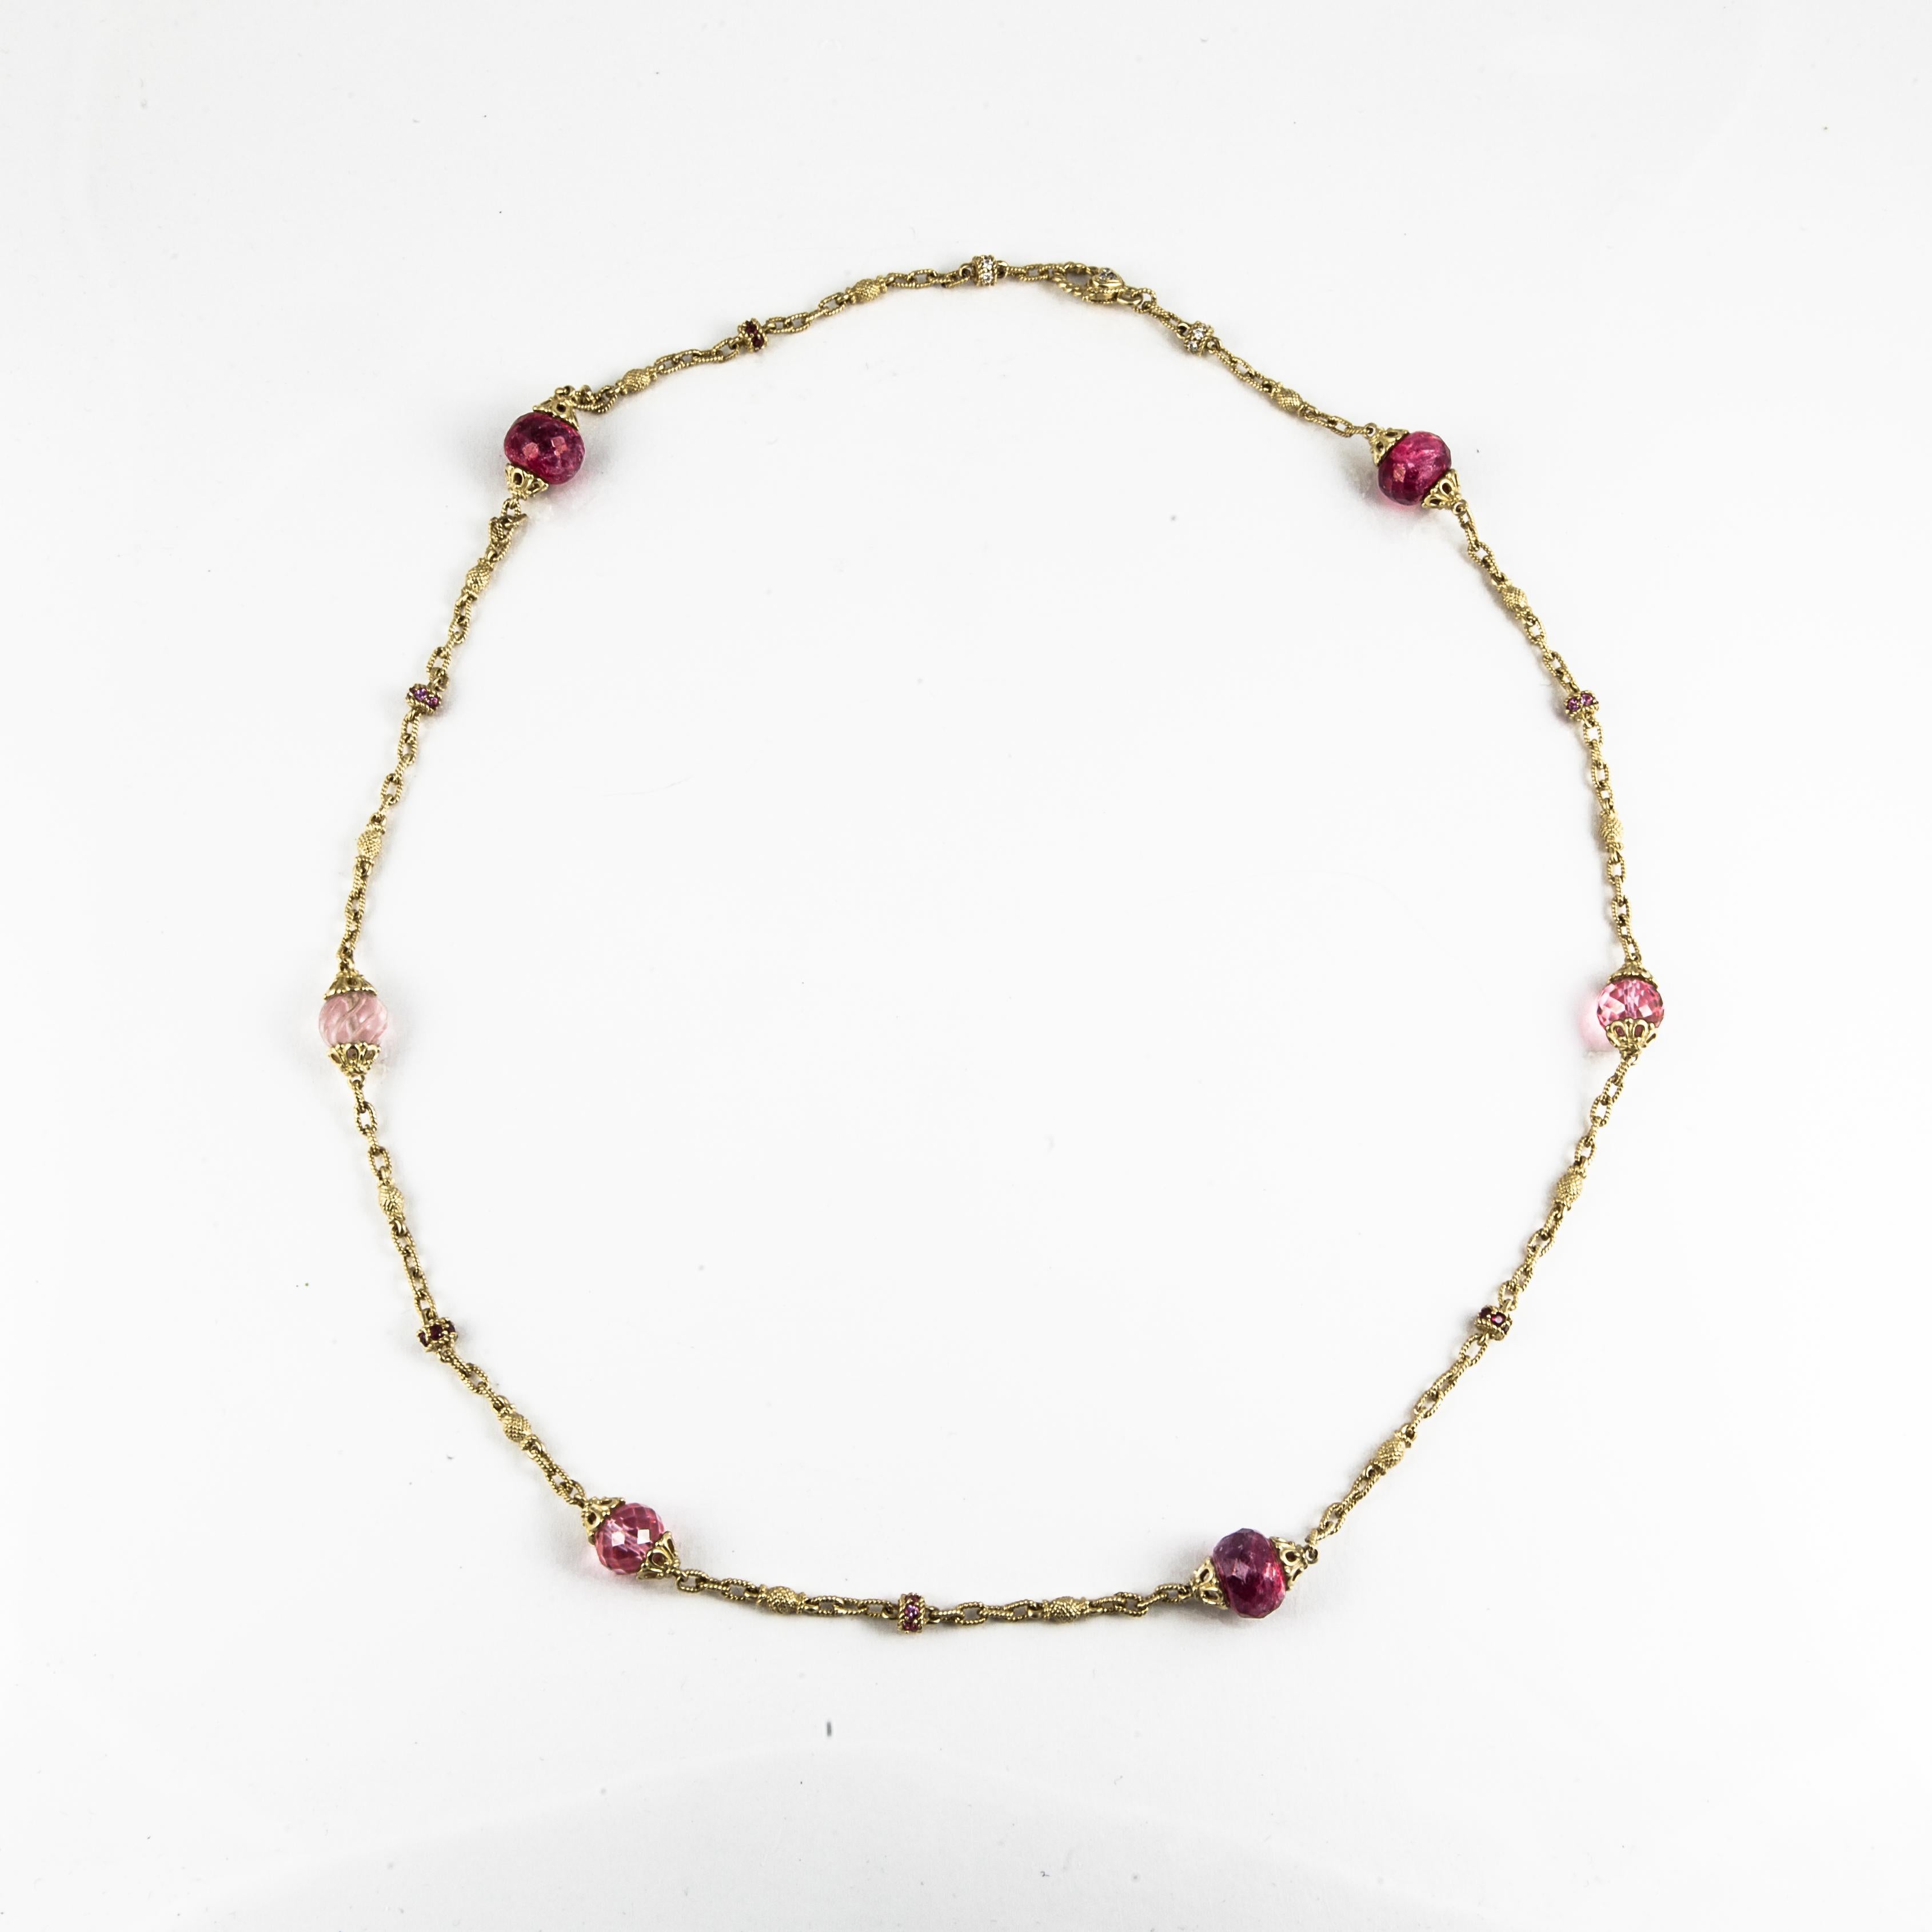 18K yellow gold link station necklace with ruby and rose quartz beads accented by round diamonds and pink sapphires. There are 15 round diamonds that total 0.15 carats, 36 pink sapphires, 3 ruby beads and 3 rose quartz beads.  Necklace measures 29